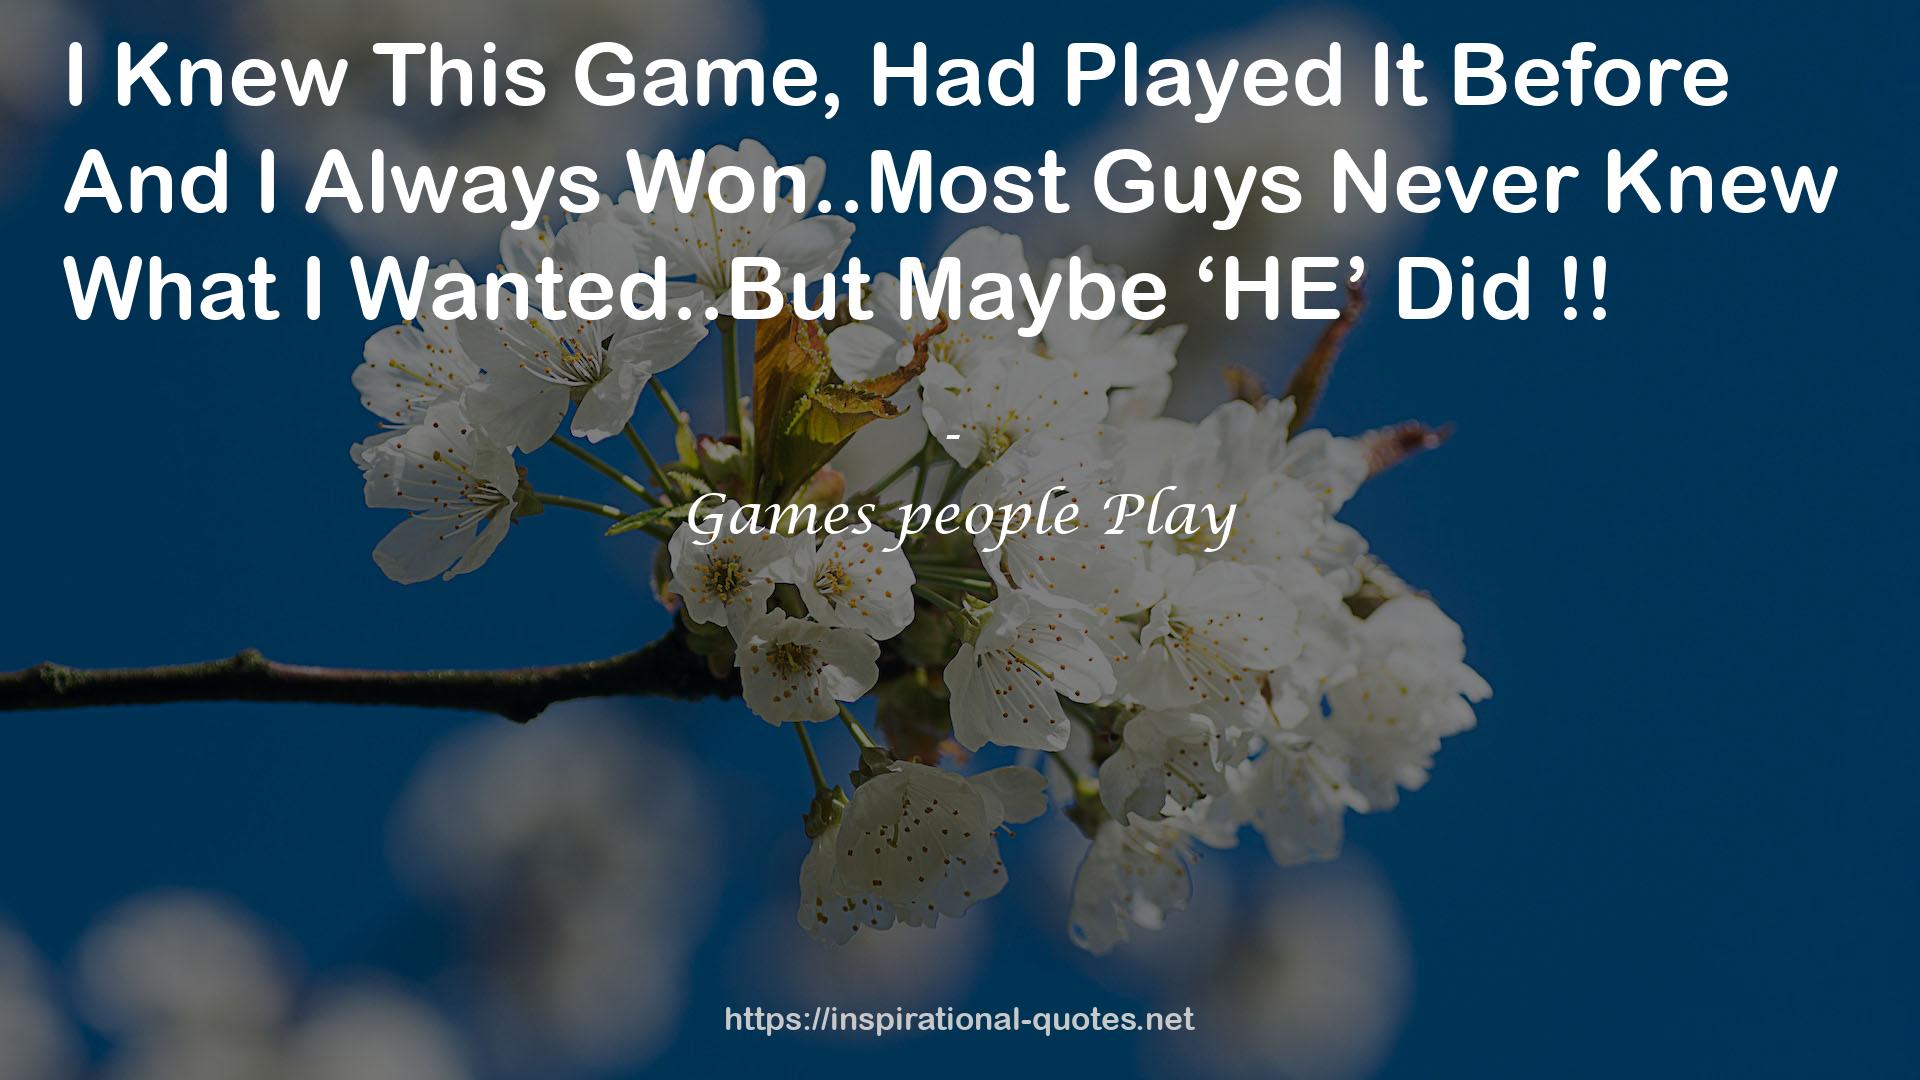 Games people Play QUOTES